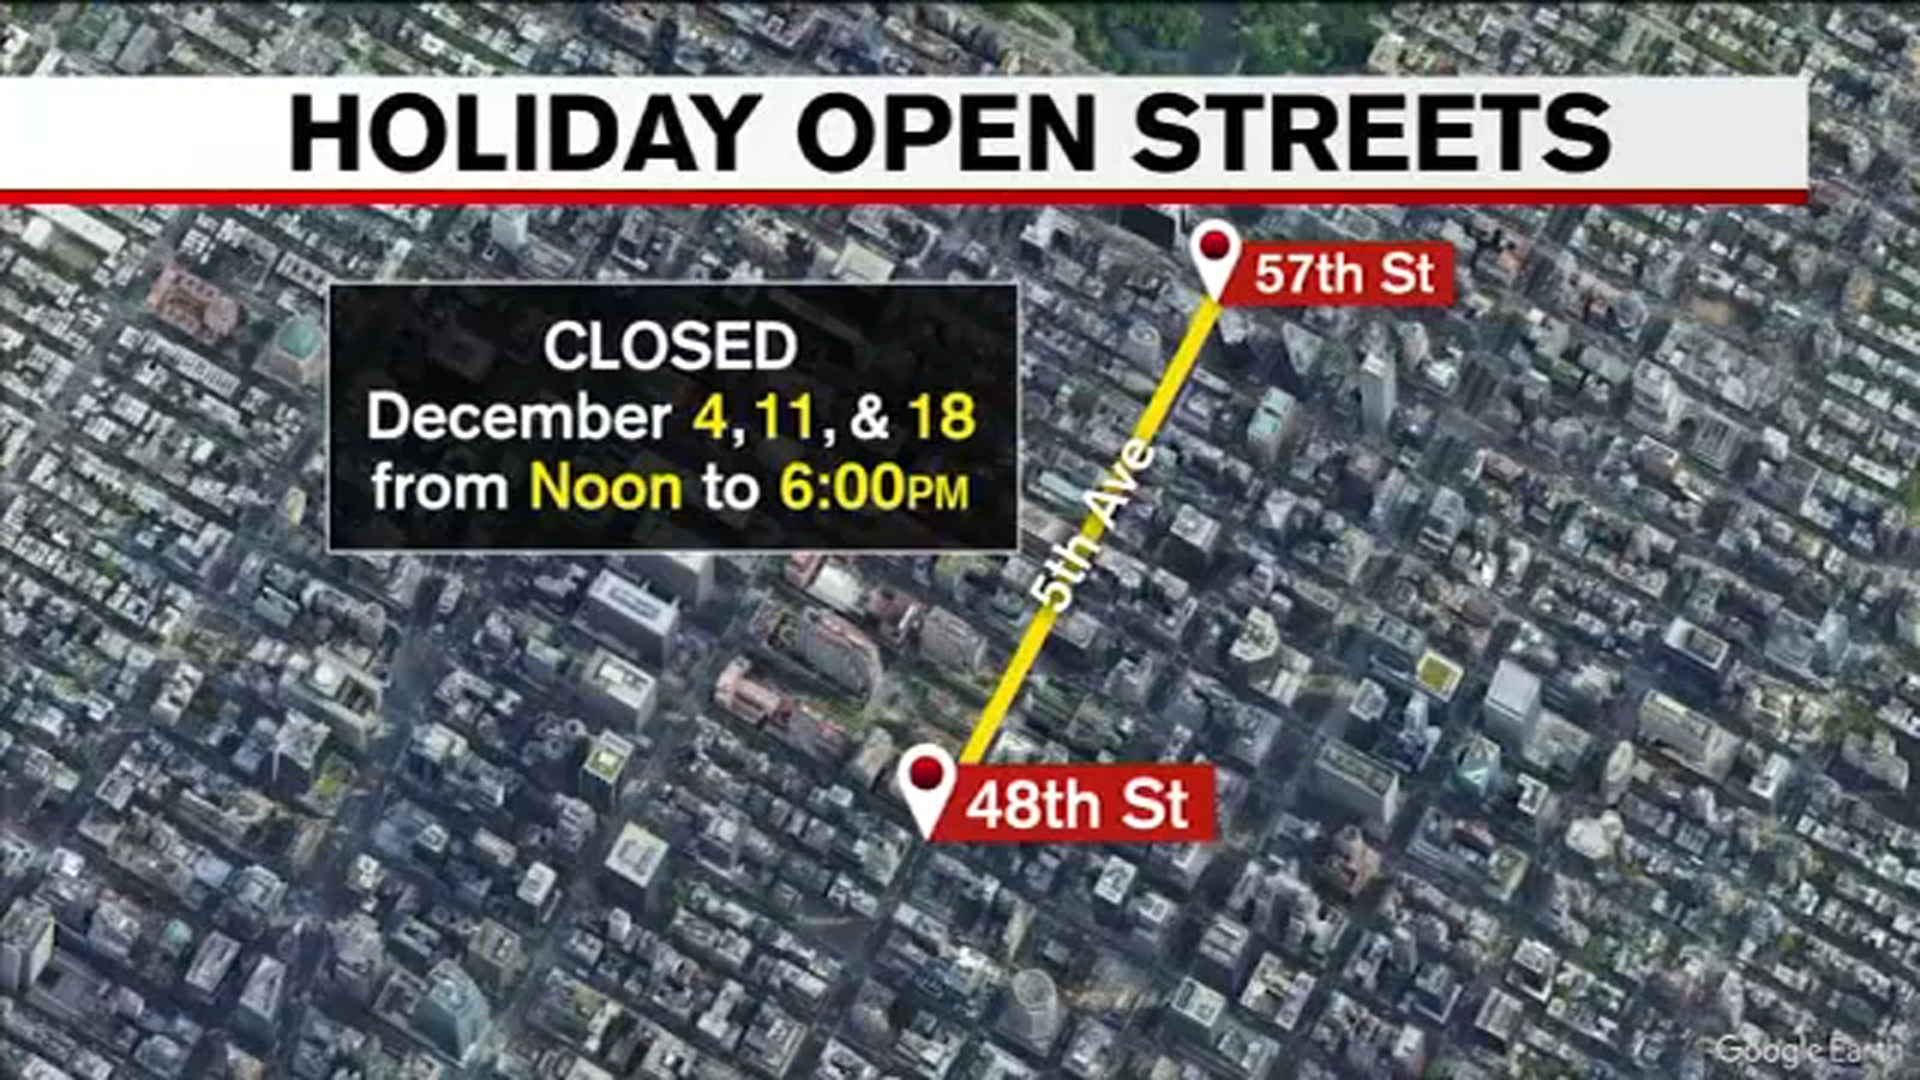 Fifth Avenue in NYC will be closed to all car traffic in December